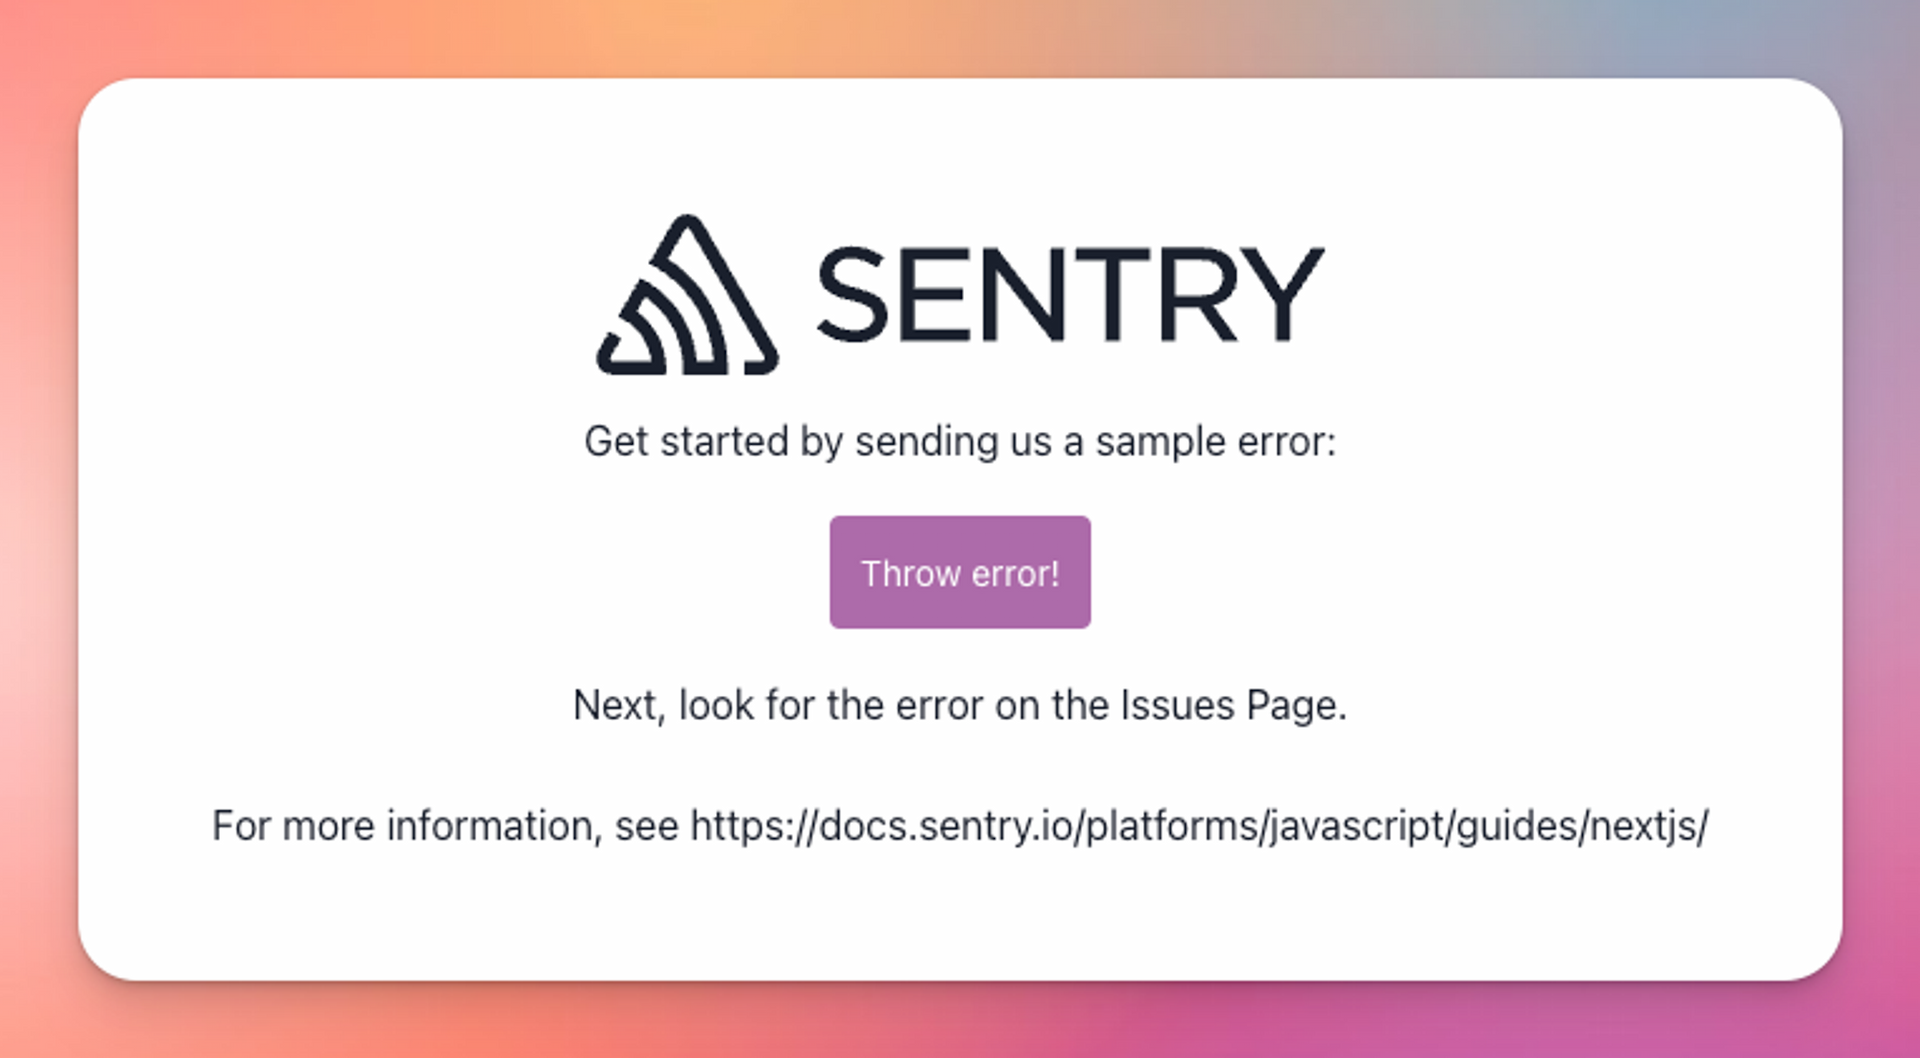 http://localhost:3000/sentry-example-page click “Throw error!”